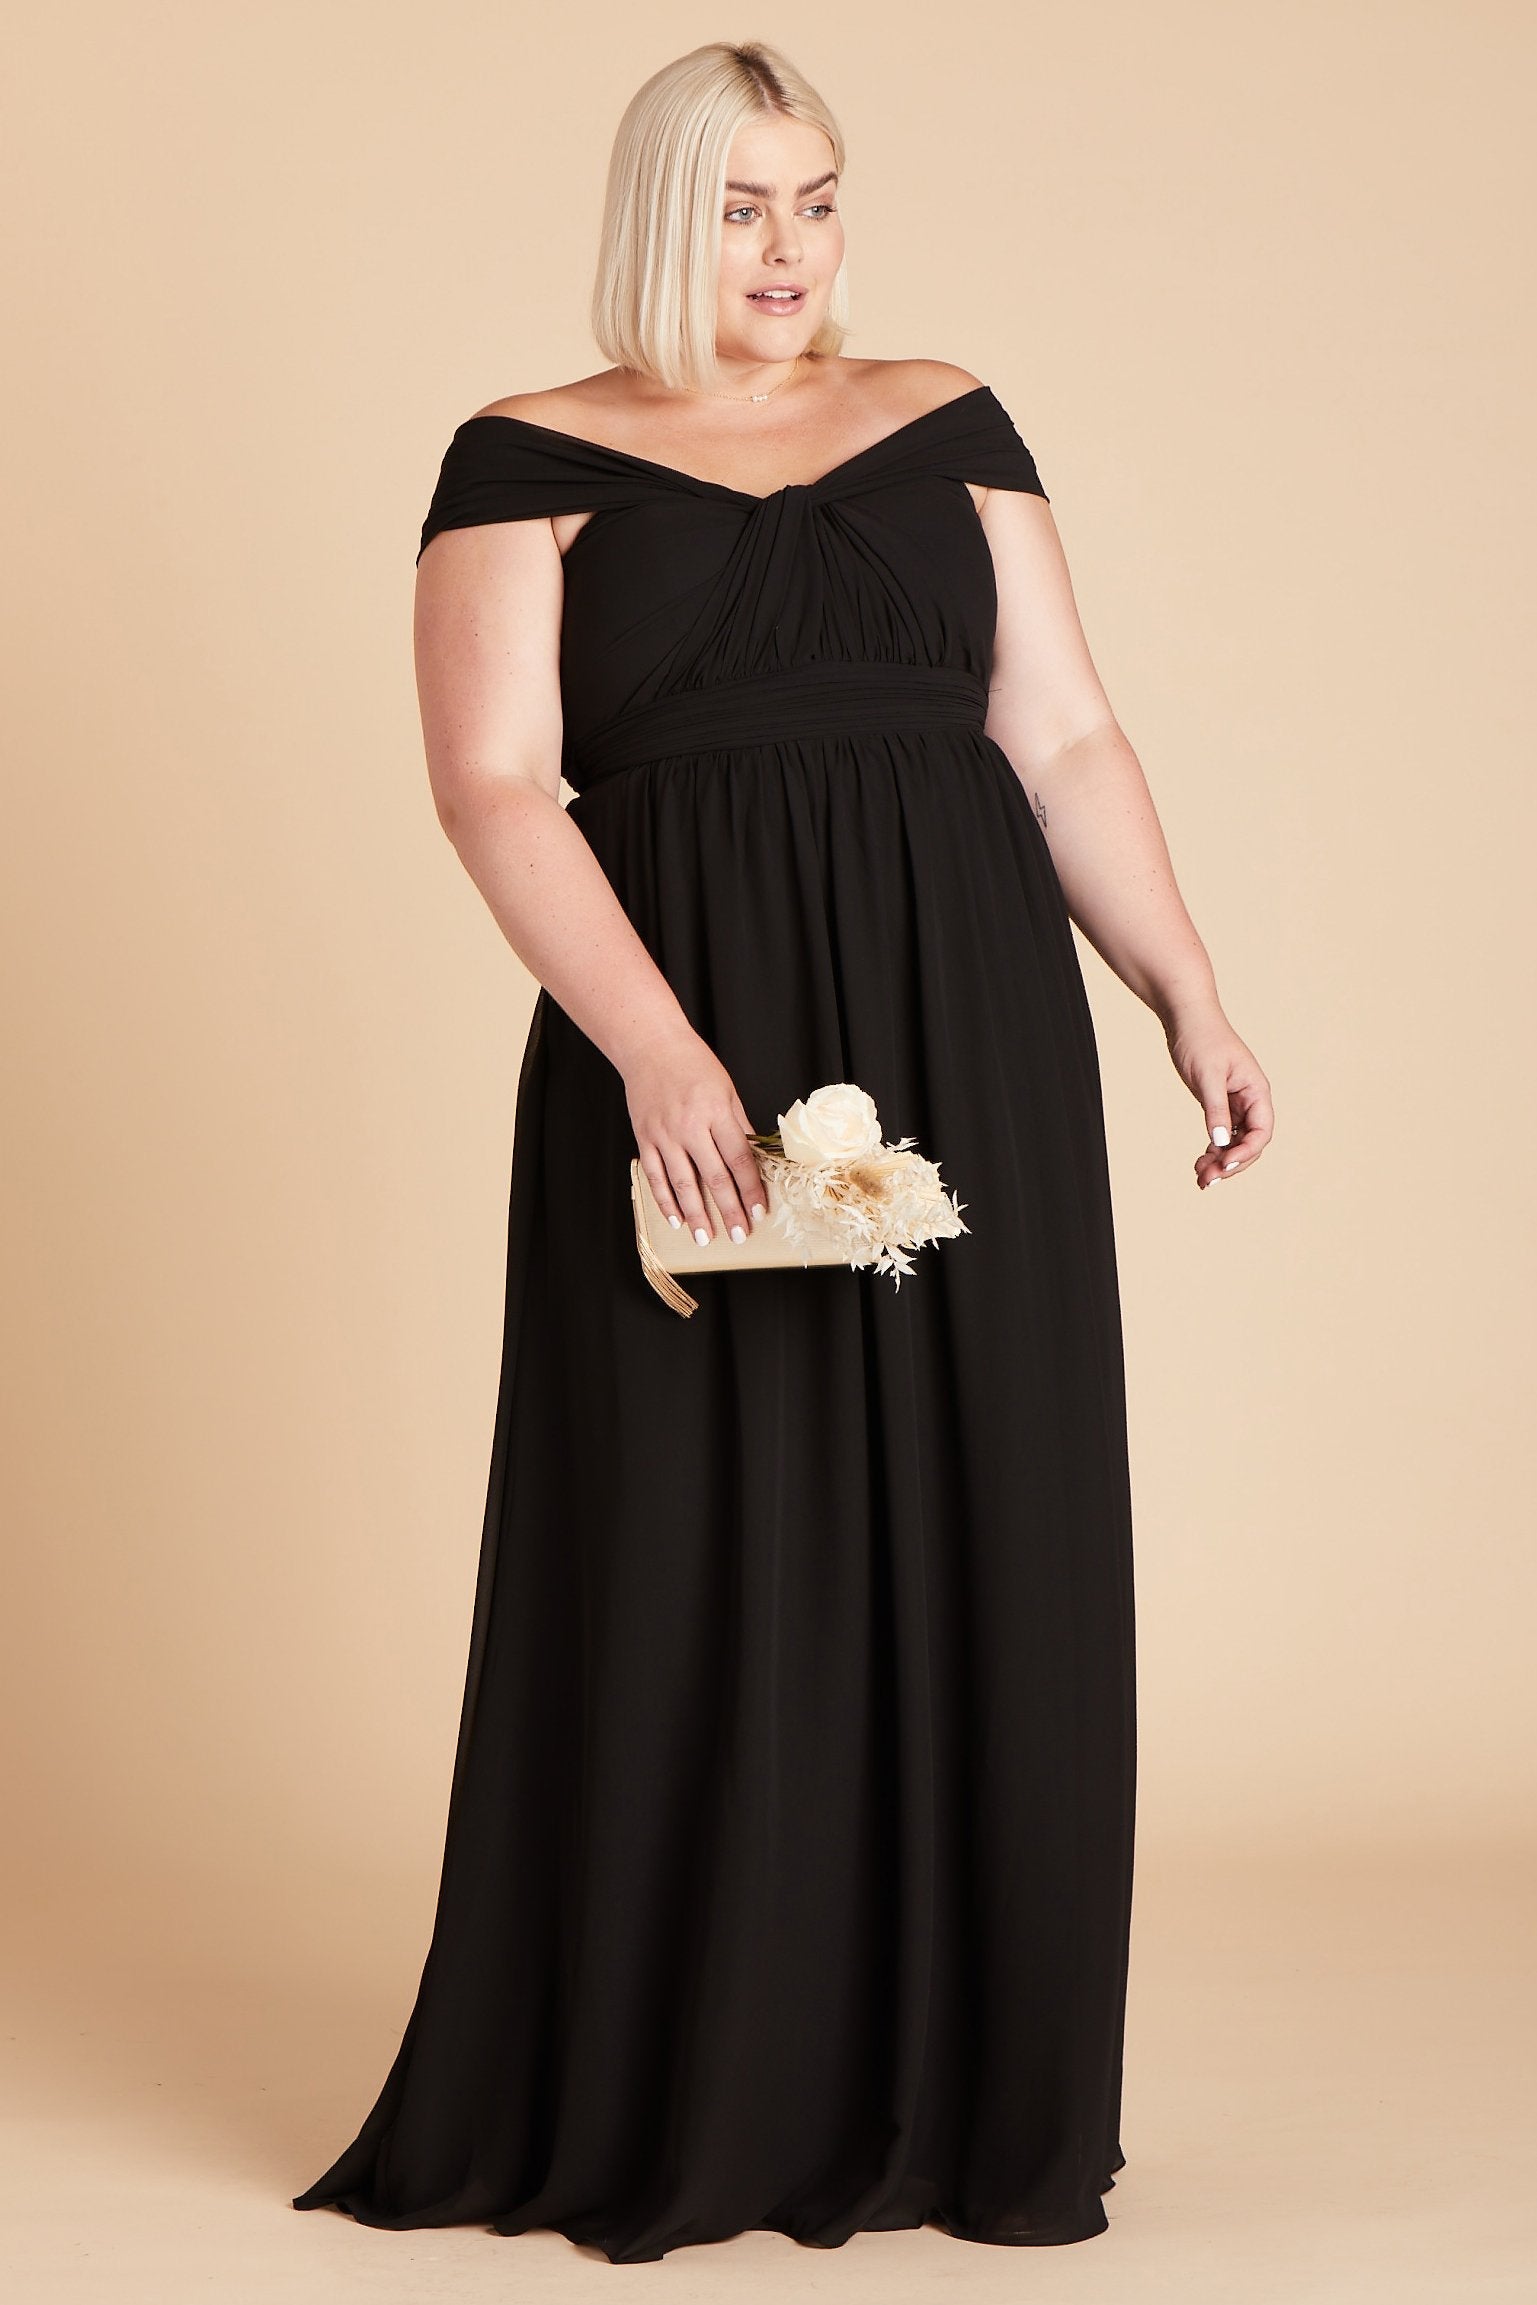  Grace convertible plus size bridesmaid dress in black chiffon by Birdy Grey, front view